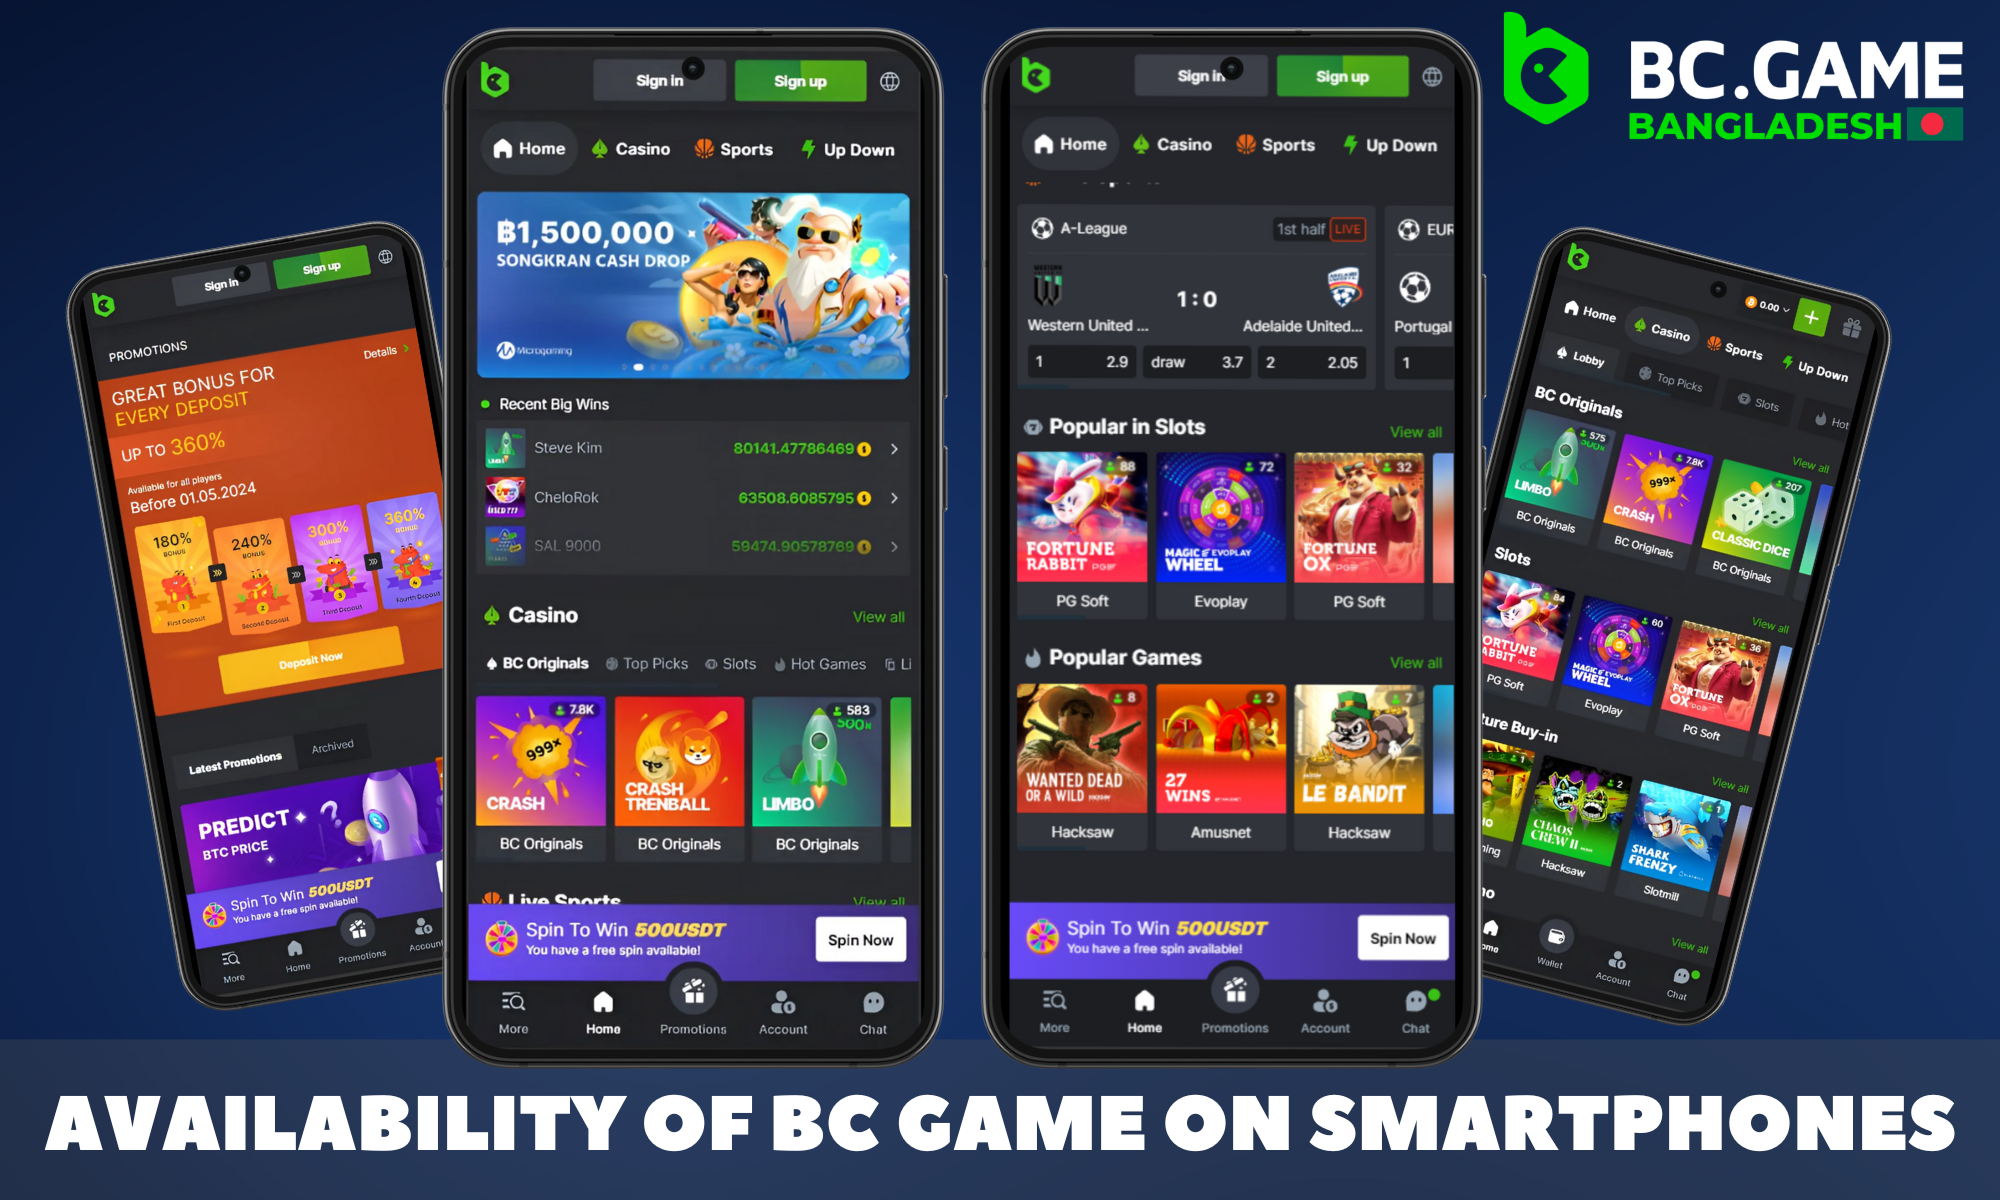 For mobile users, BC.Game has created an application for Android and IOS